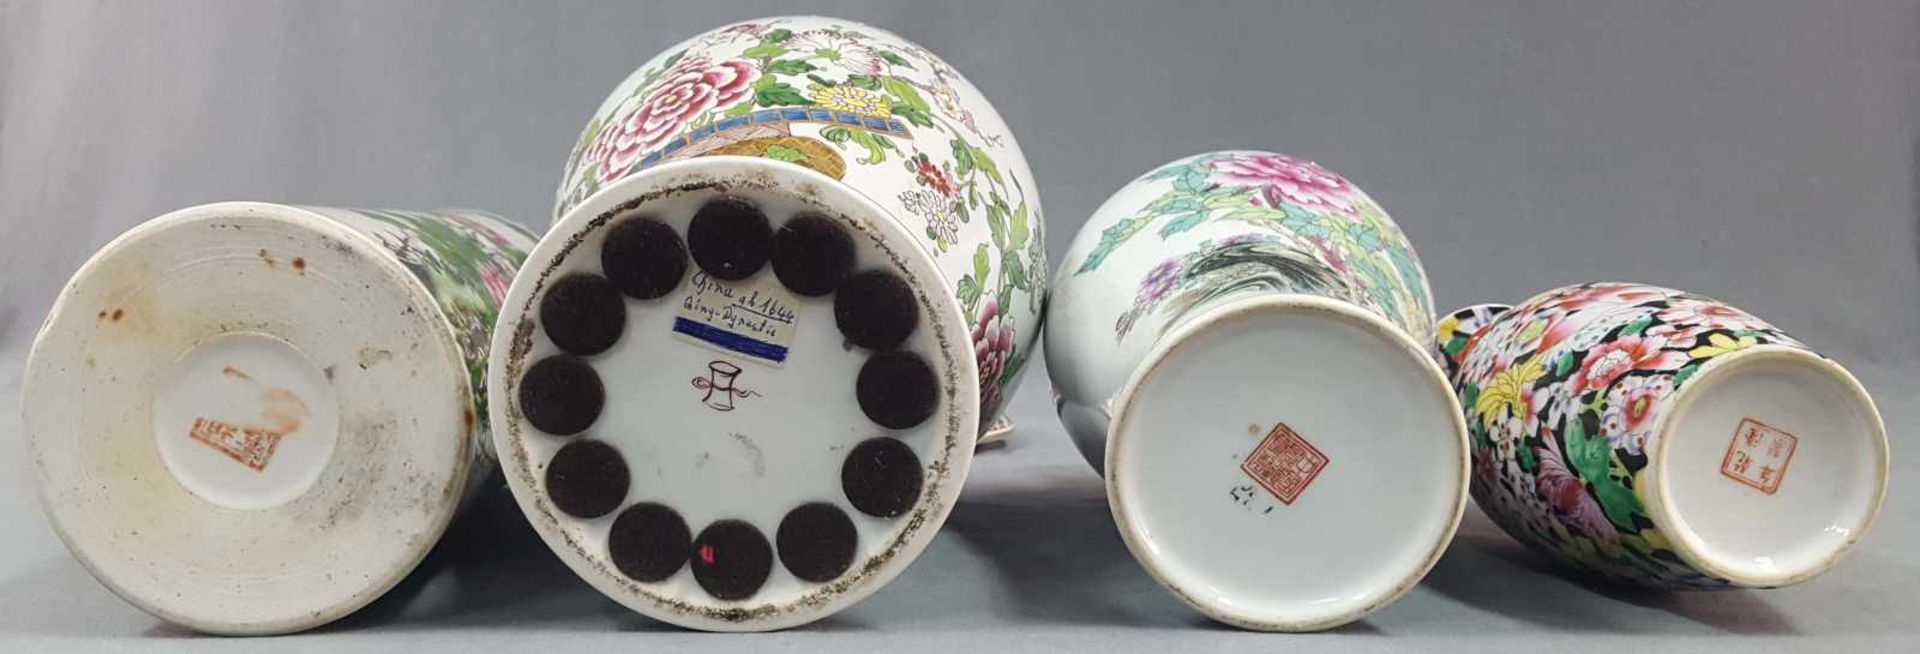 3 vases and 1 lid vase. Proably China. - Image 2 of 14